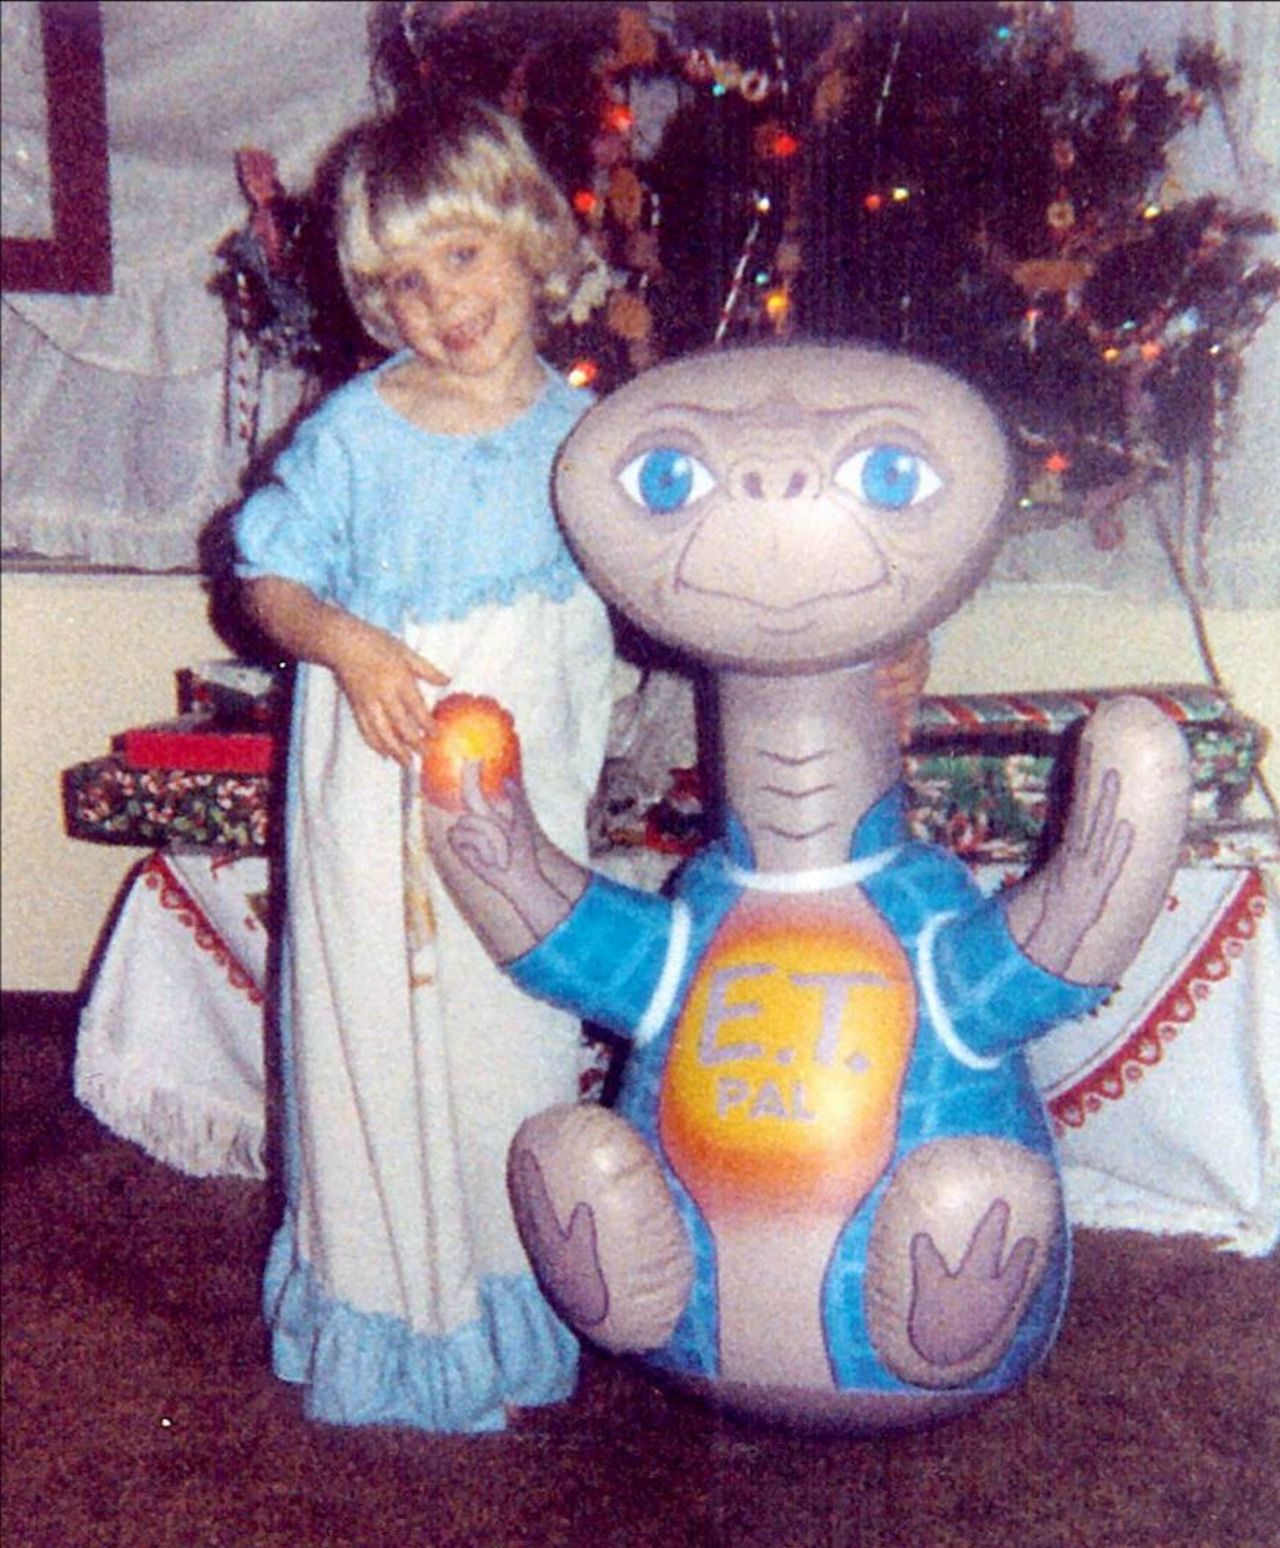 The movie "E.T." came out in 1982, and Janie Lambert's<a href="http://ireport.cnn.com/docs/DOC-1021466"> 5-year-old, Jennie,</a> was enthralled. If there was a full or almost-full moon, the little girl would look out the window to see if she could spot the alien. 